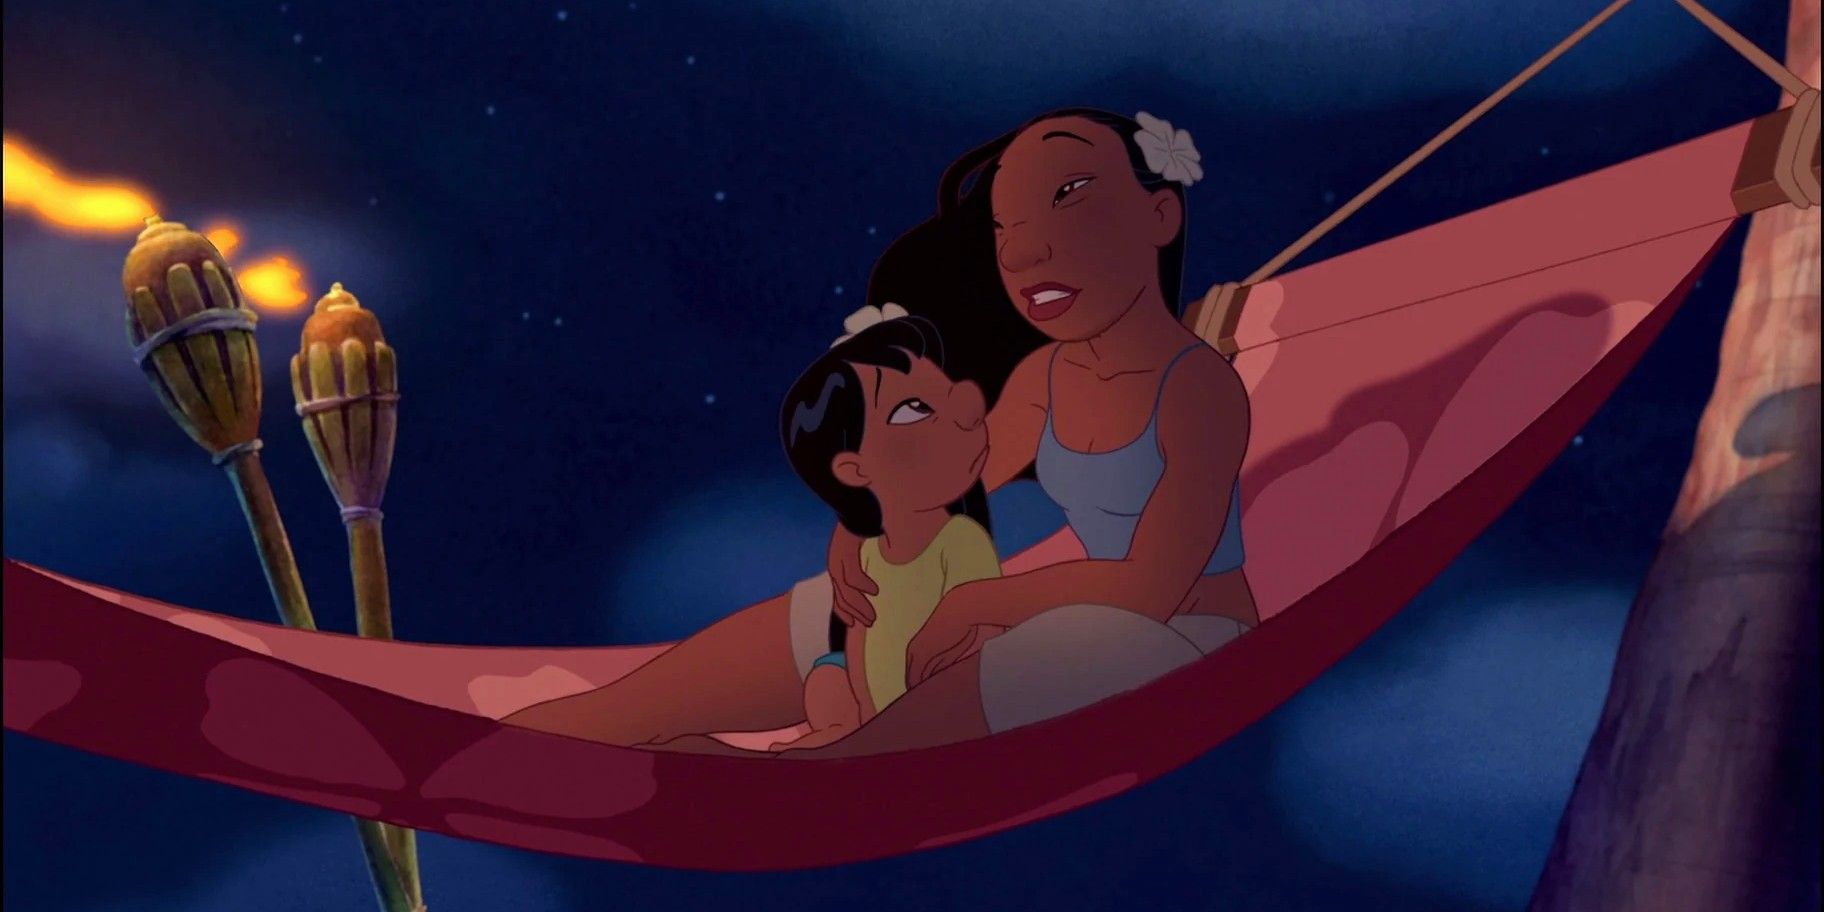 Nani puts Lilo in the hammock, which is lit by torches under the night sky.